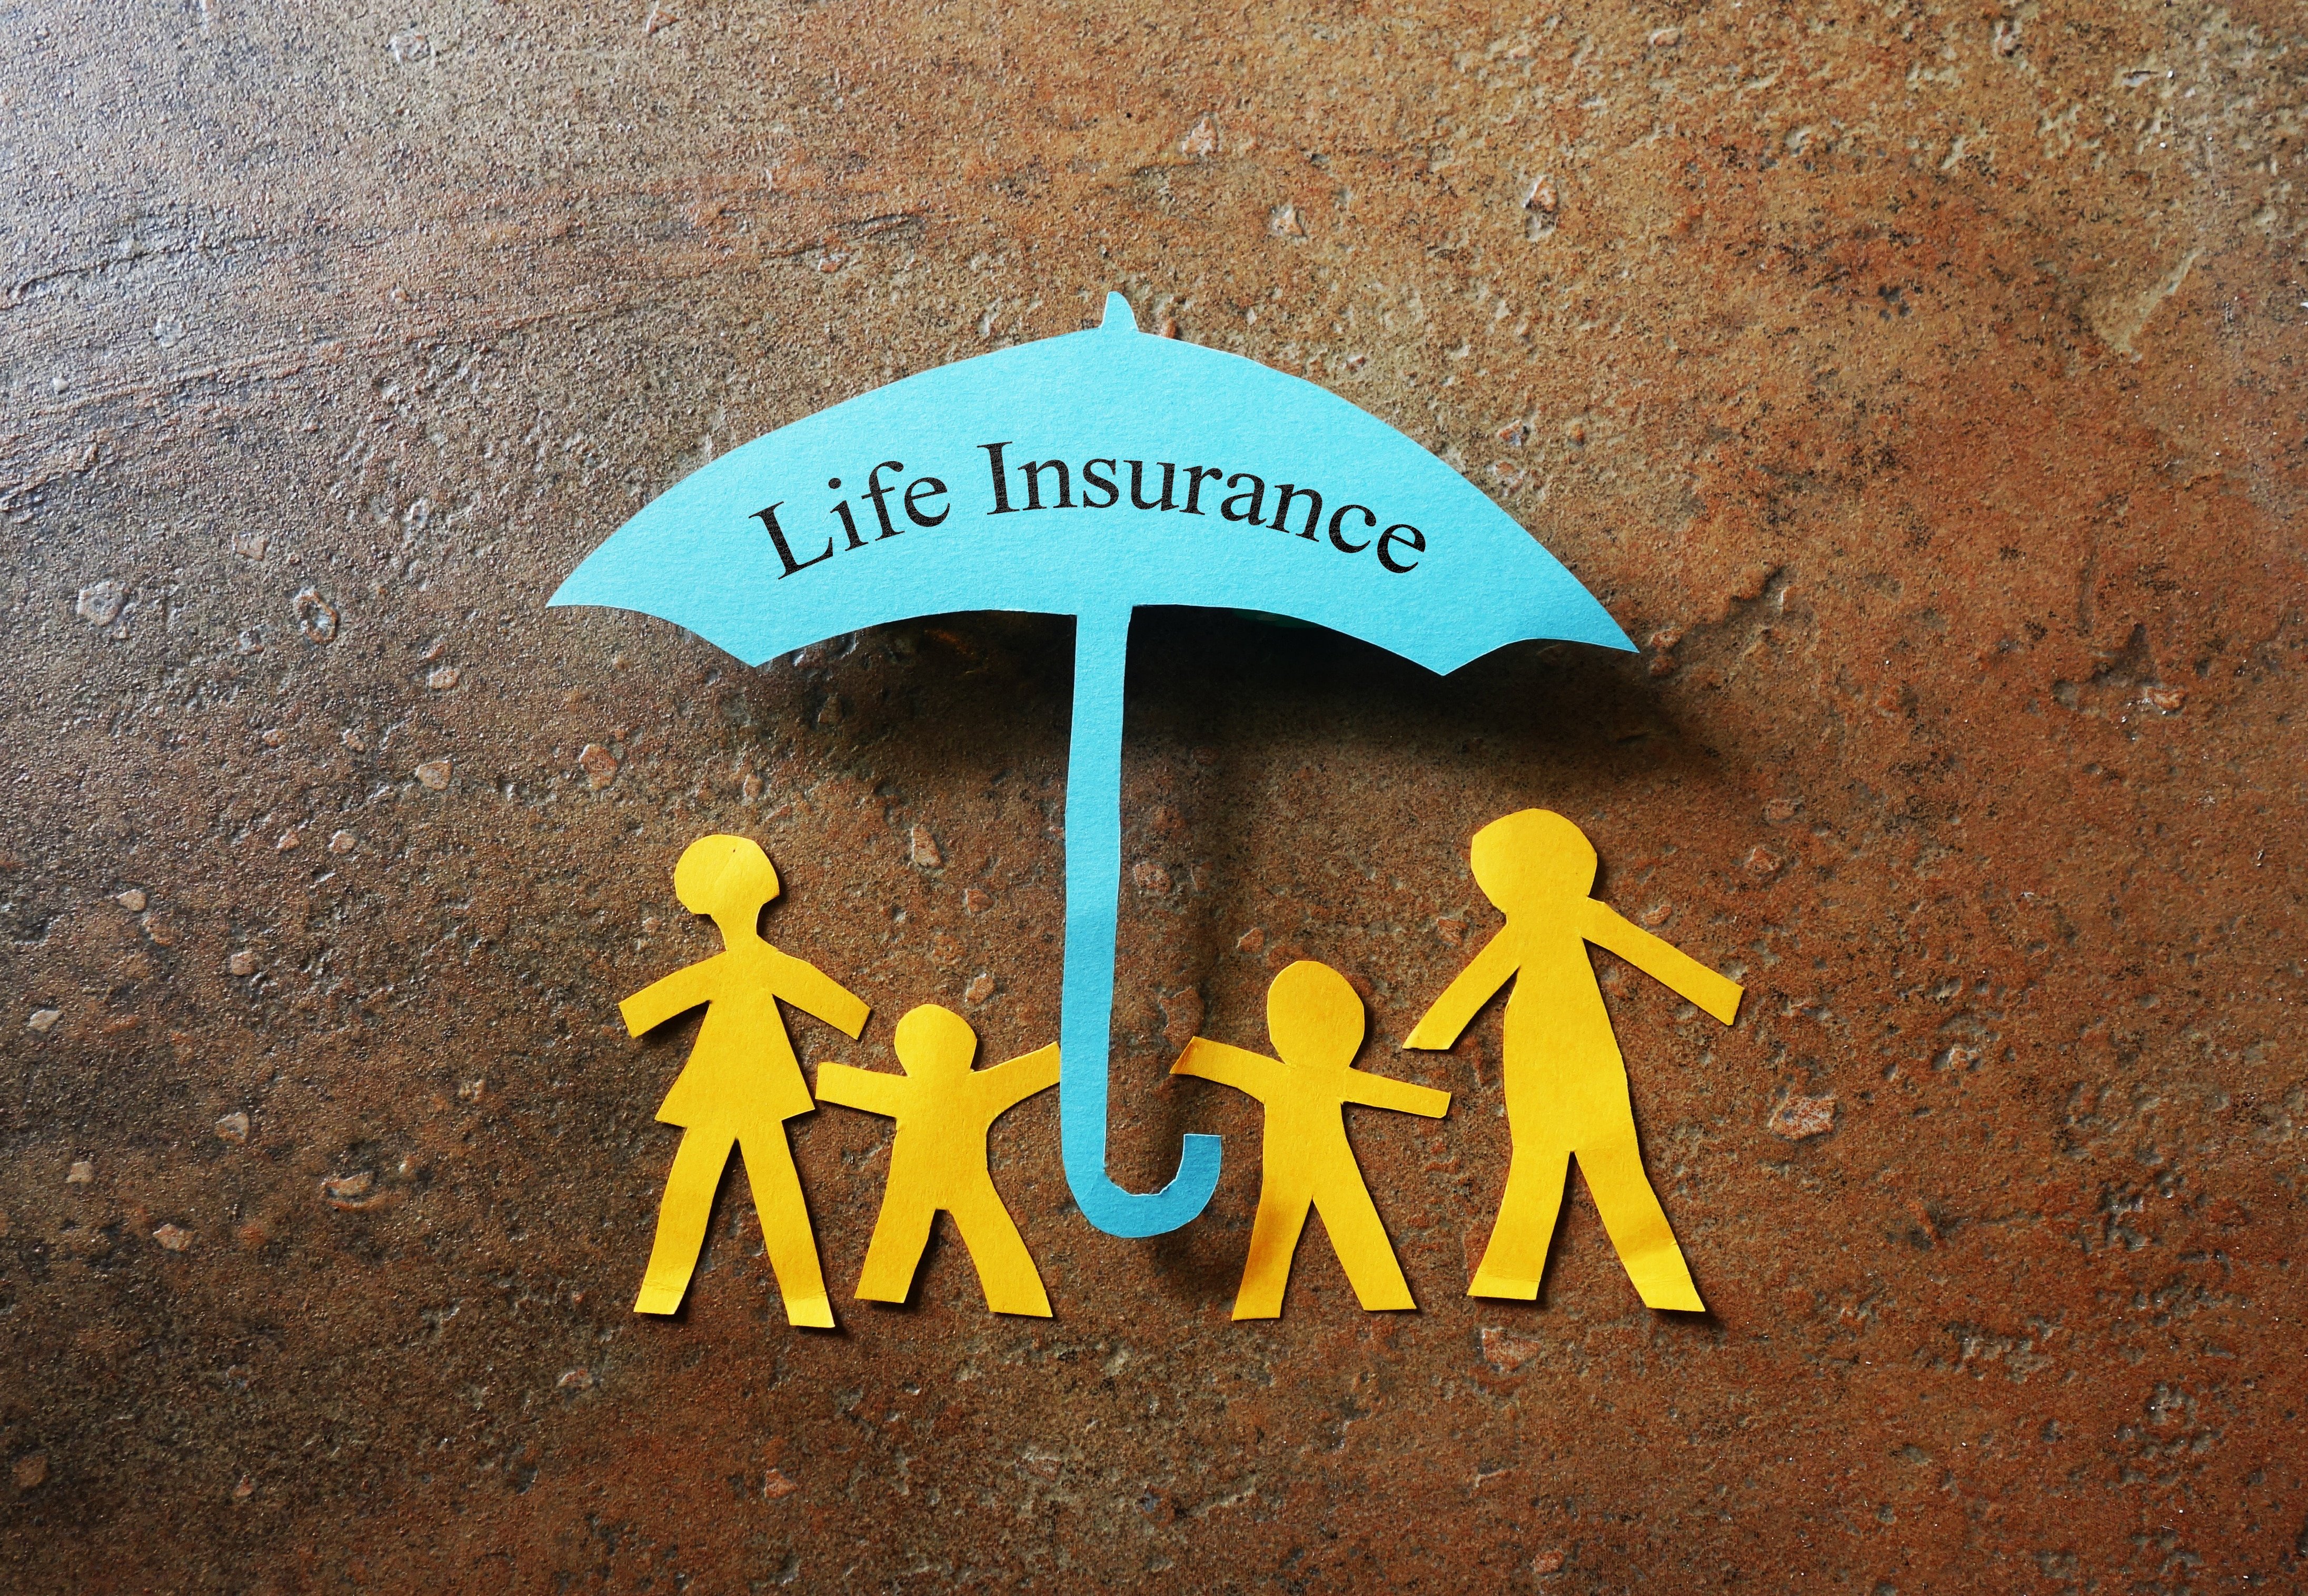 Guardian Life Insurance Review 2018 - Top Quote Life Insurance